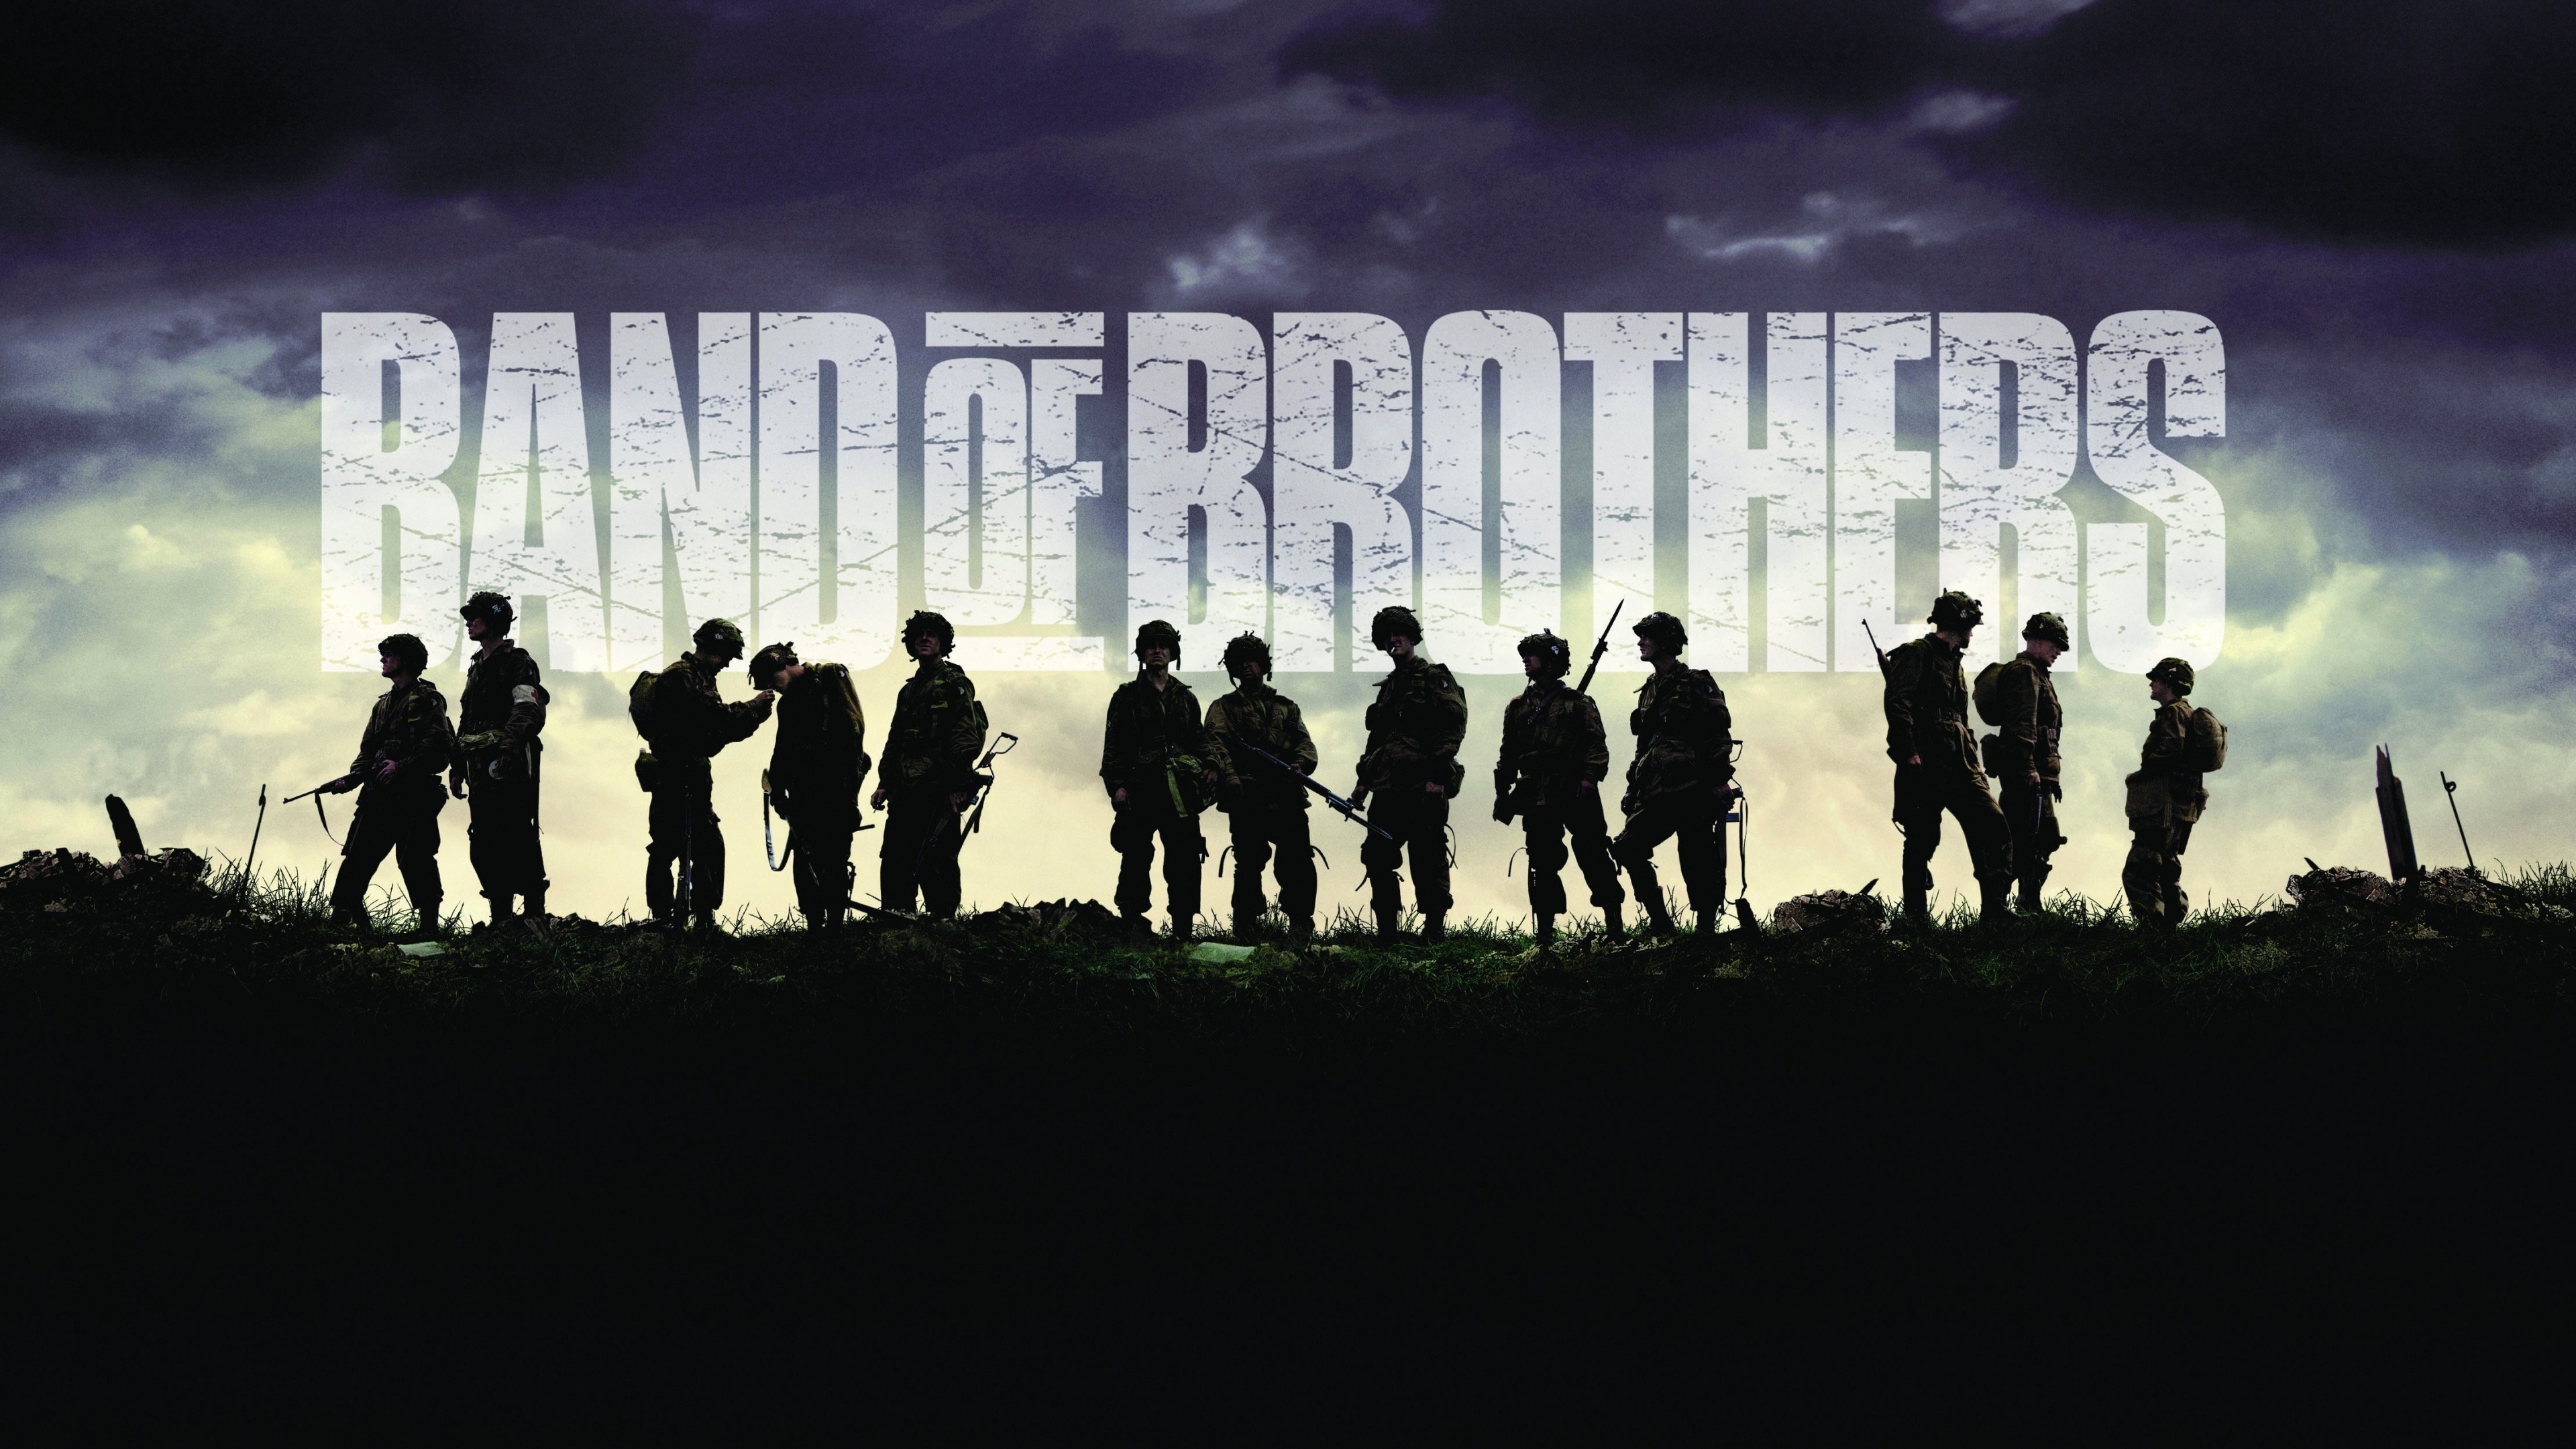 Band of Brothers for 3840 x 2160 Ultra HD resolution